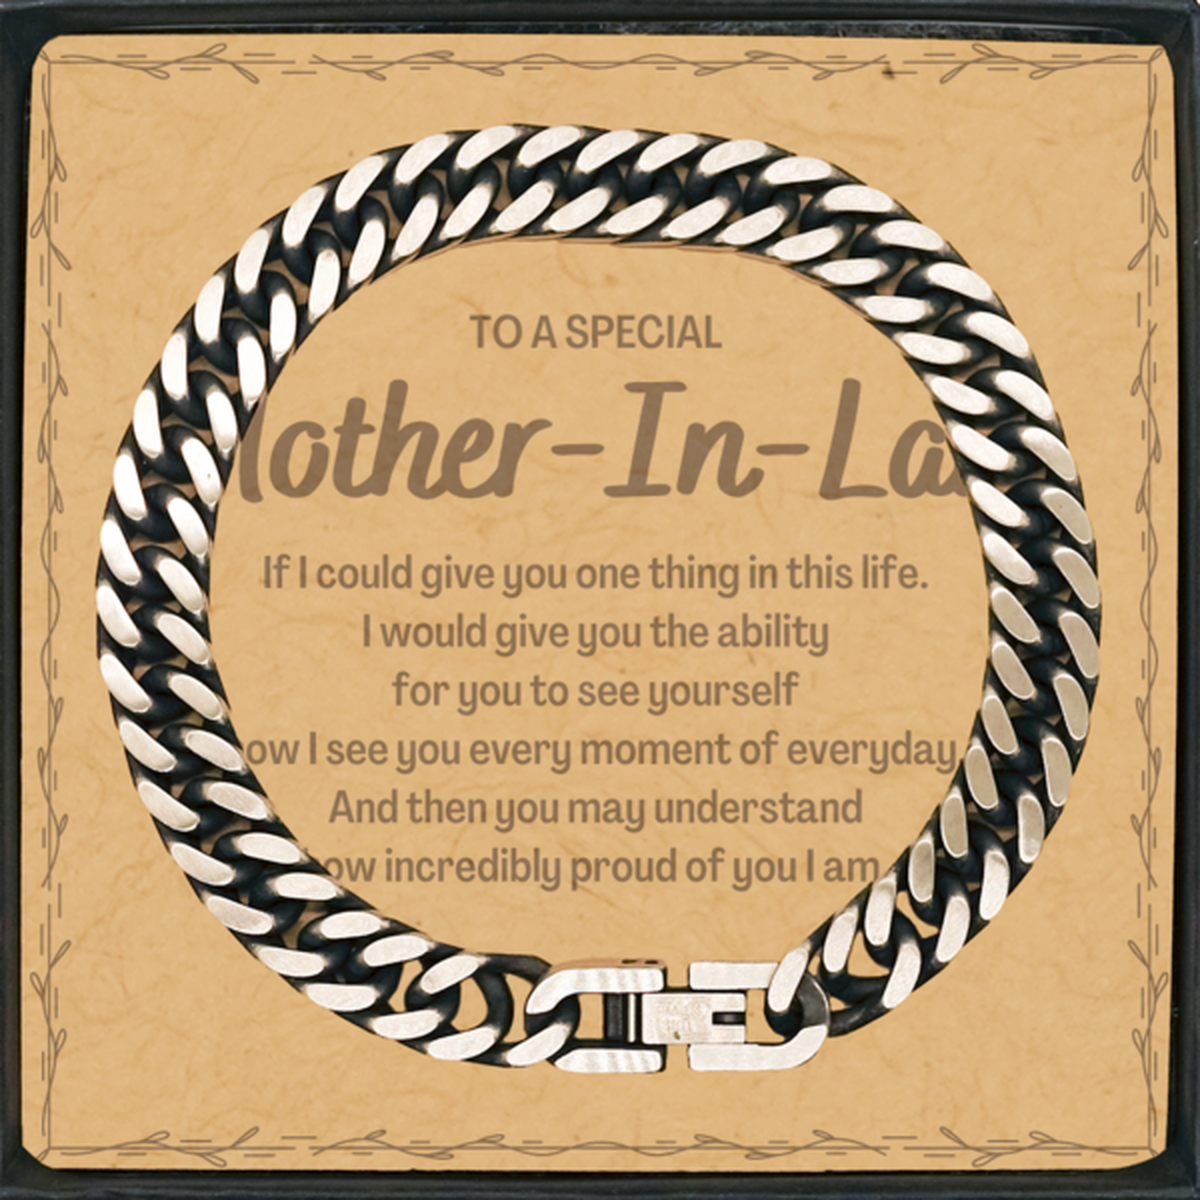 To My Mother-In-Law Cuban Link Chain Bracelet, Gifts For Mother-In-Law Message Card, Inspirational Gifts for Christmas Birthday, Epic Gifts for Mother-In-Law To A Special Mother-In-Law how incredibly proud of you I am